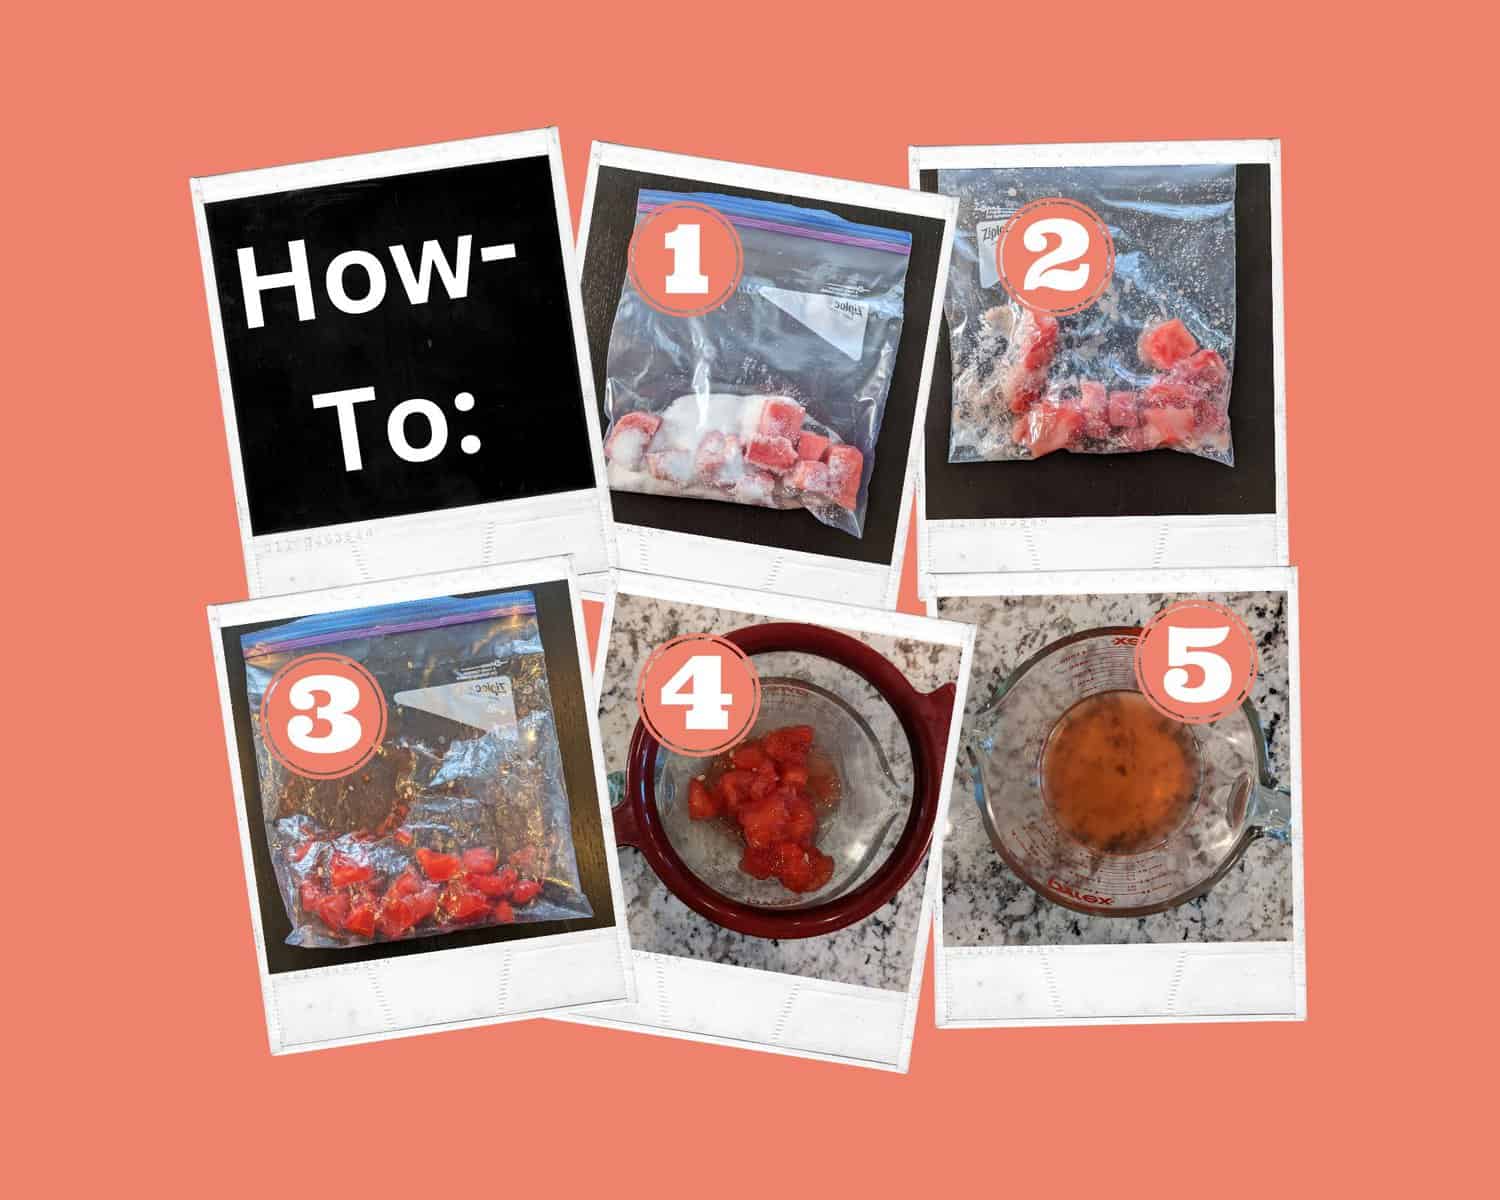 how to photos for how to make watermelon syrup